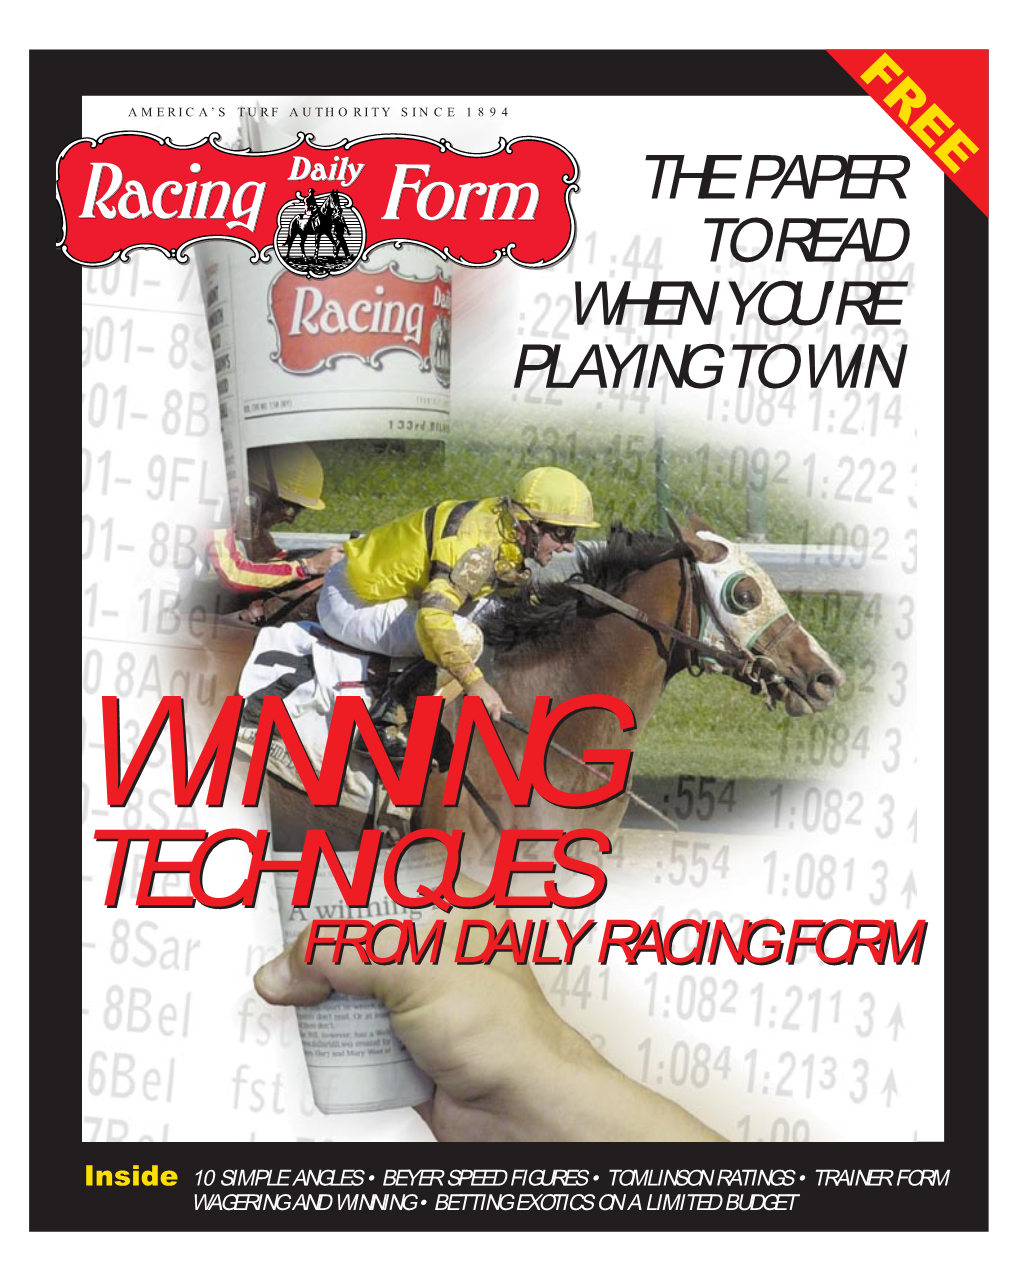 Winning Techniquestechniques Fromfrom Dailydaily Racingracing Formform